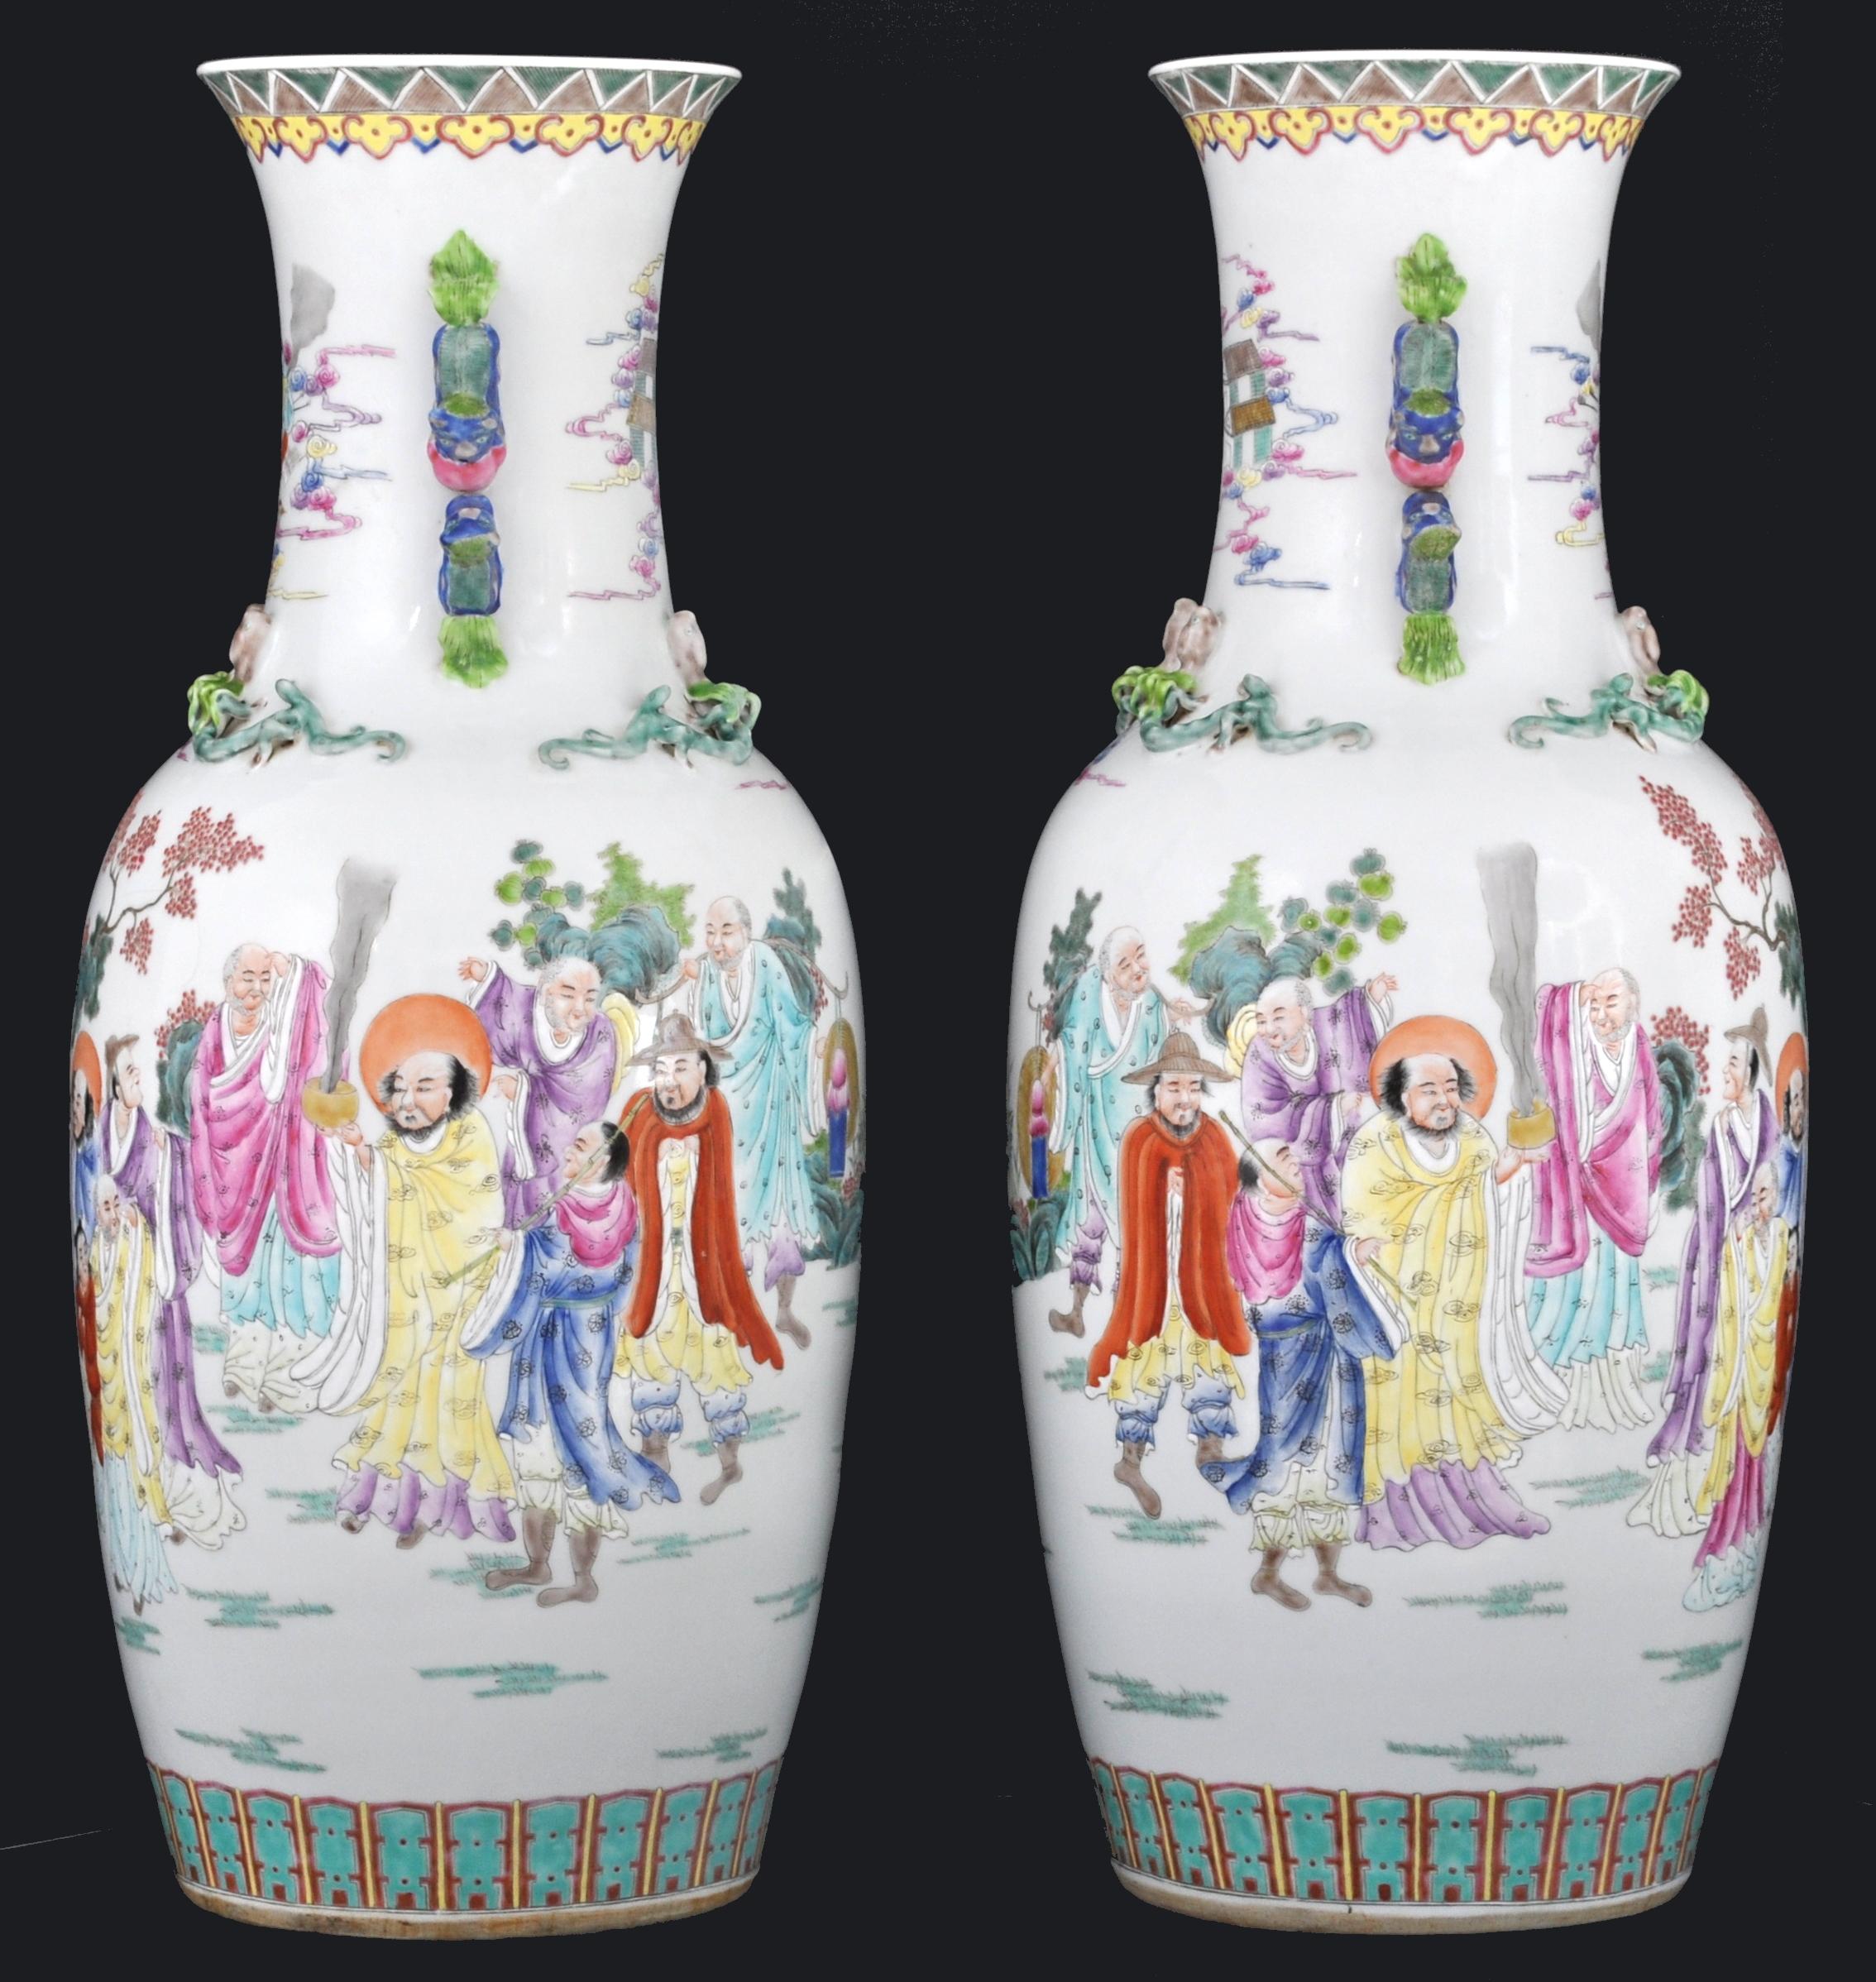 Monumental pair of antique Chinese late Qing to early Republican period Famille Rose Porcelain vases. The vases of baluster form with applied handles modeled as dragons, each vase with a hand painted polychrome scene of immortal figures in a garden